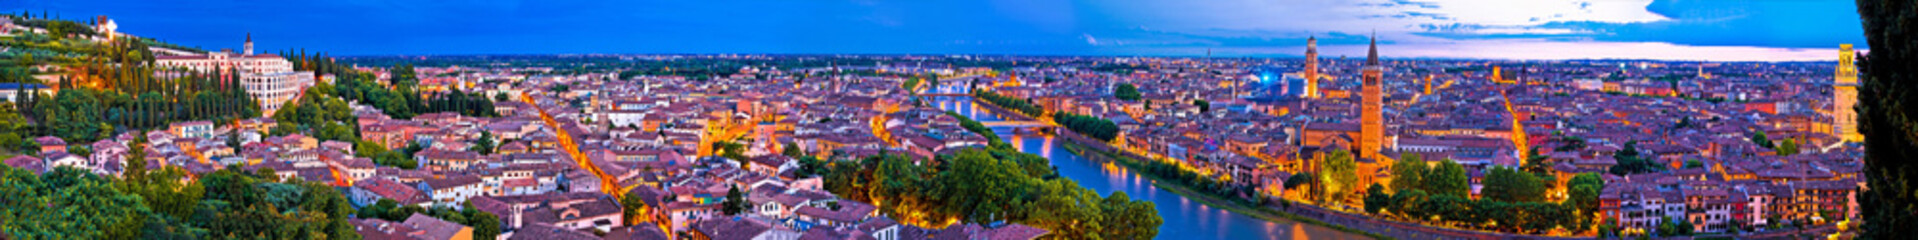 Verona old city and Adige river panoramic aerial view at evening